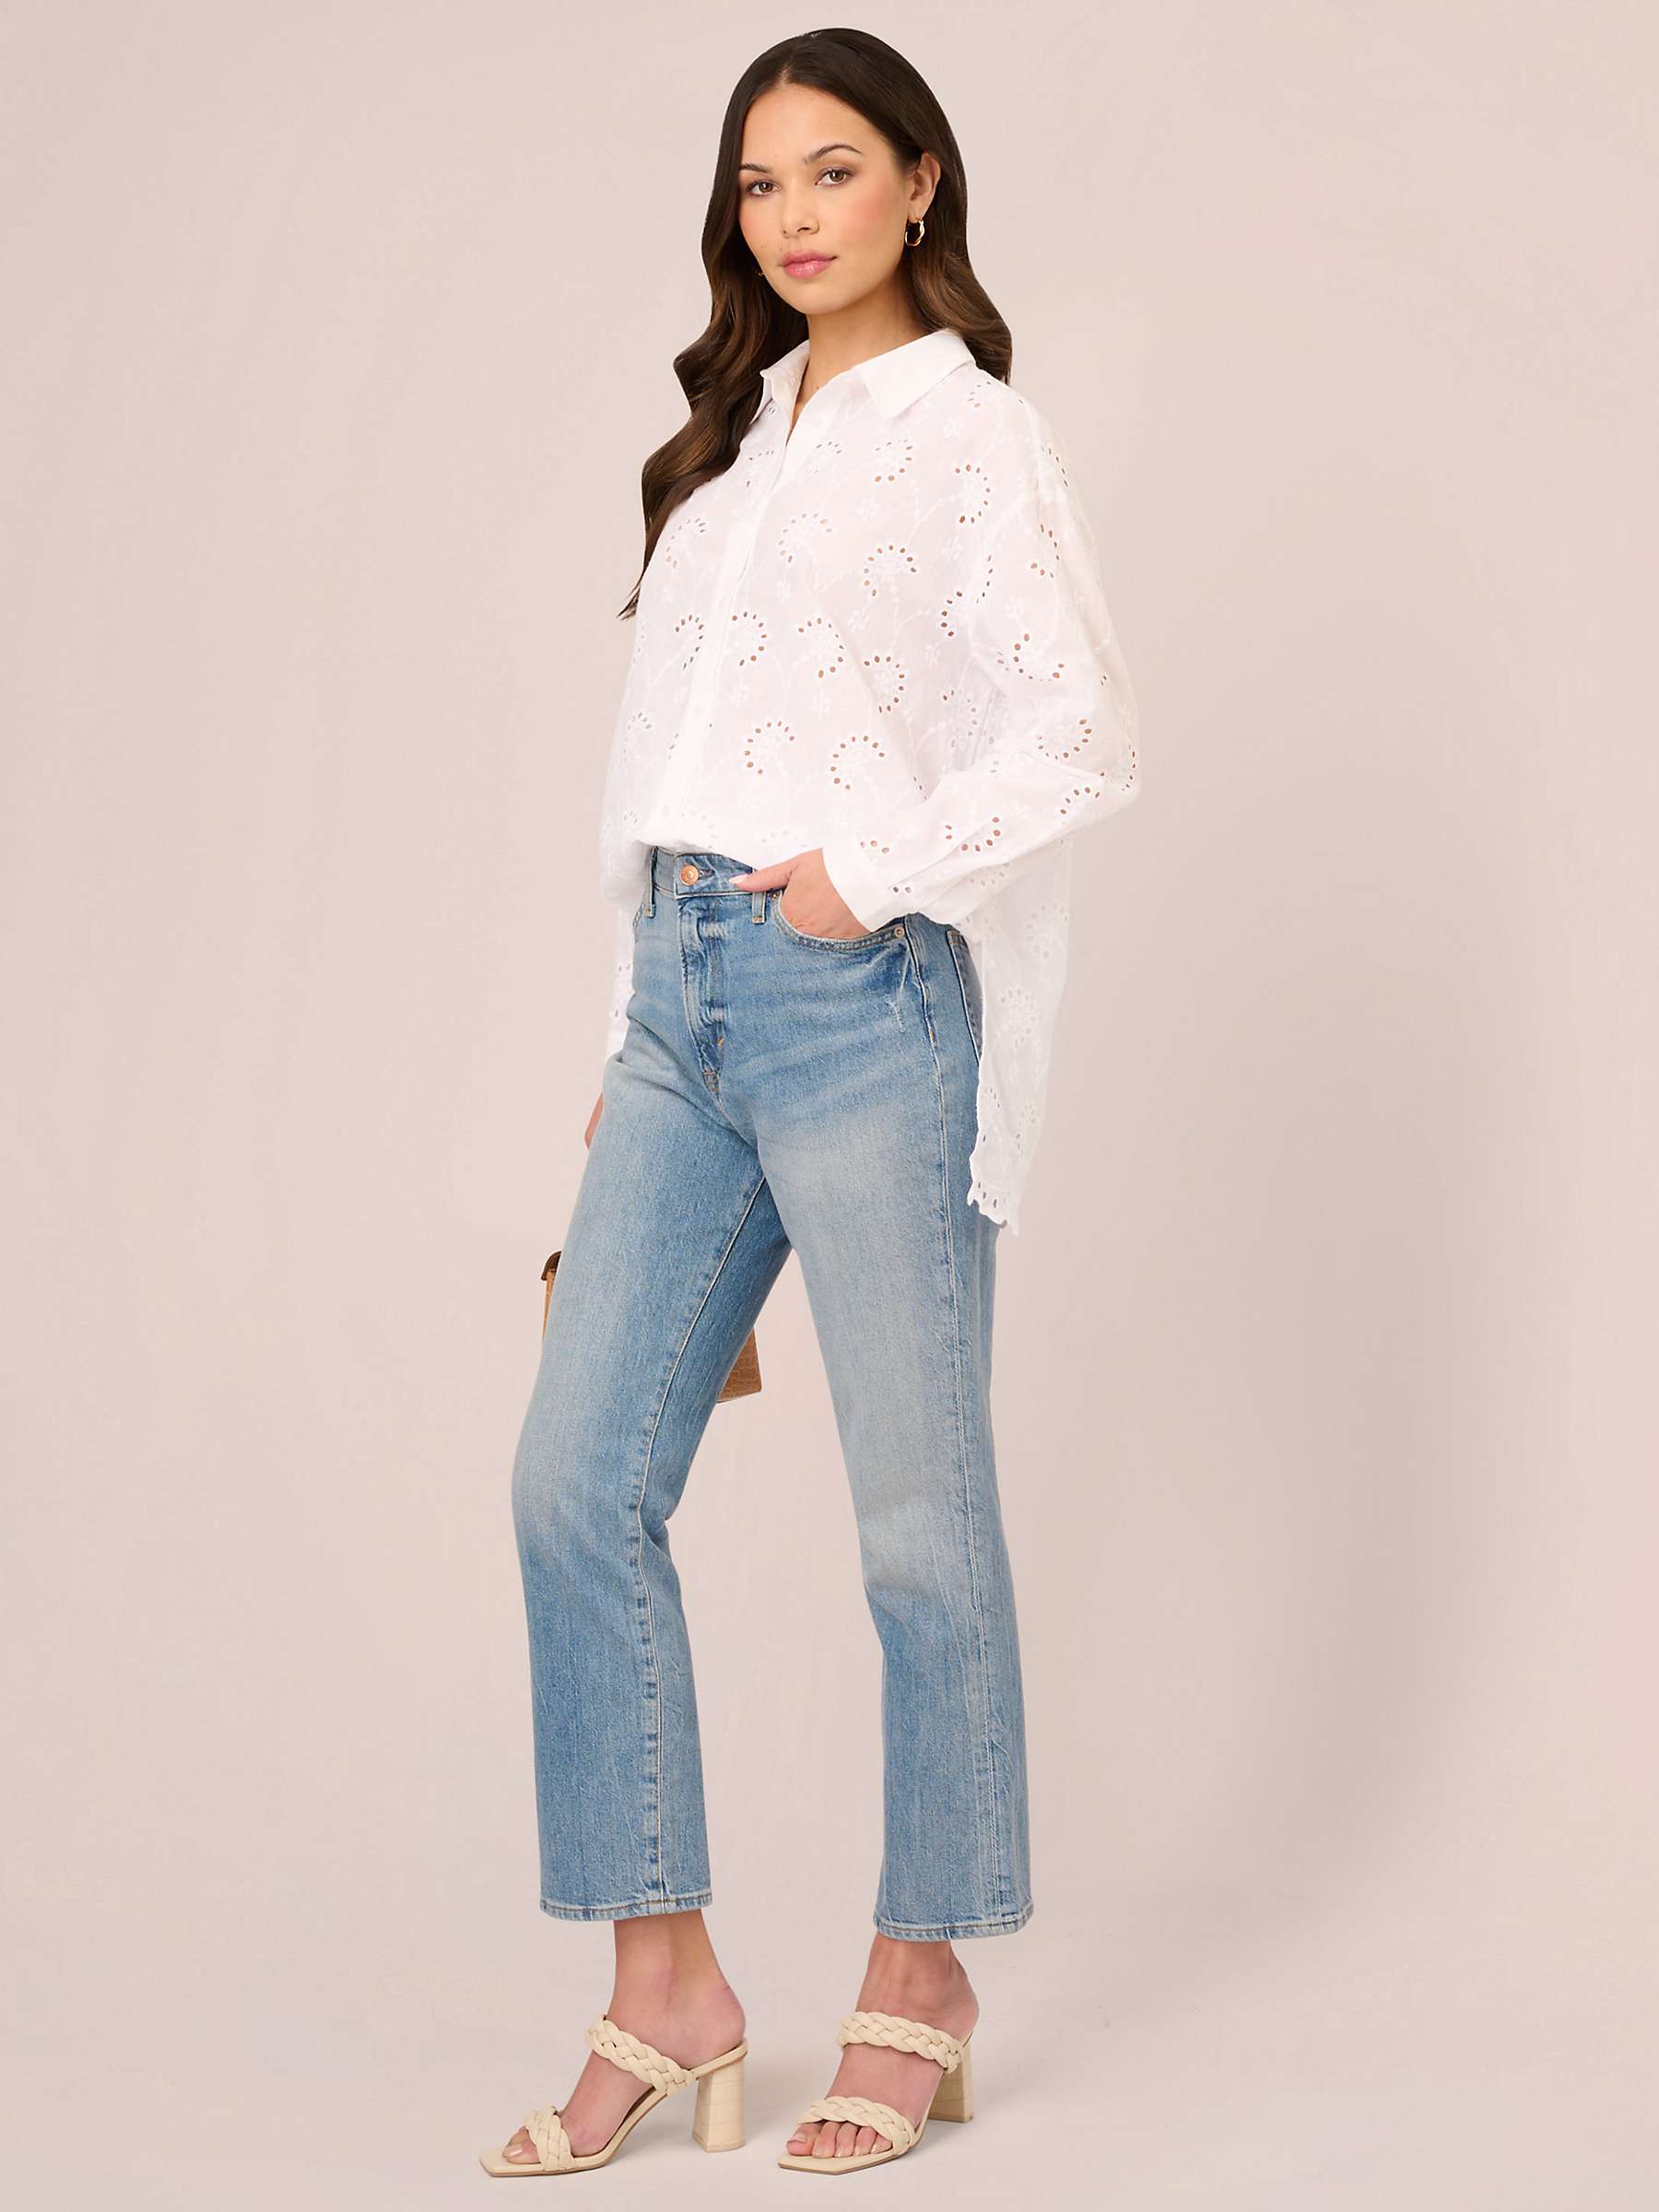 Buy Adrianna Papell Eyelet Broderie Button Front Tunic Shirt, White Online at johnlewis.com